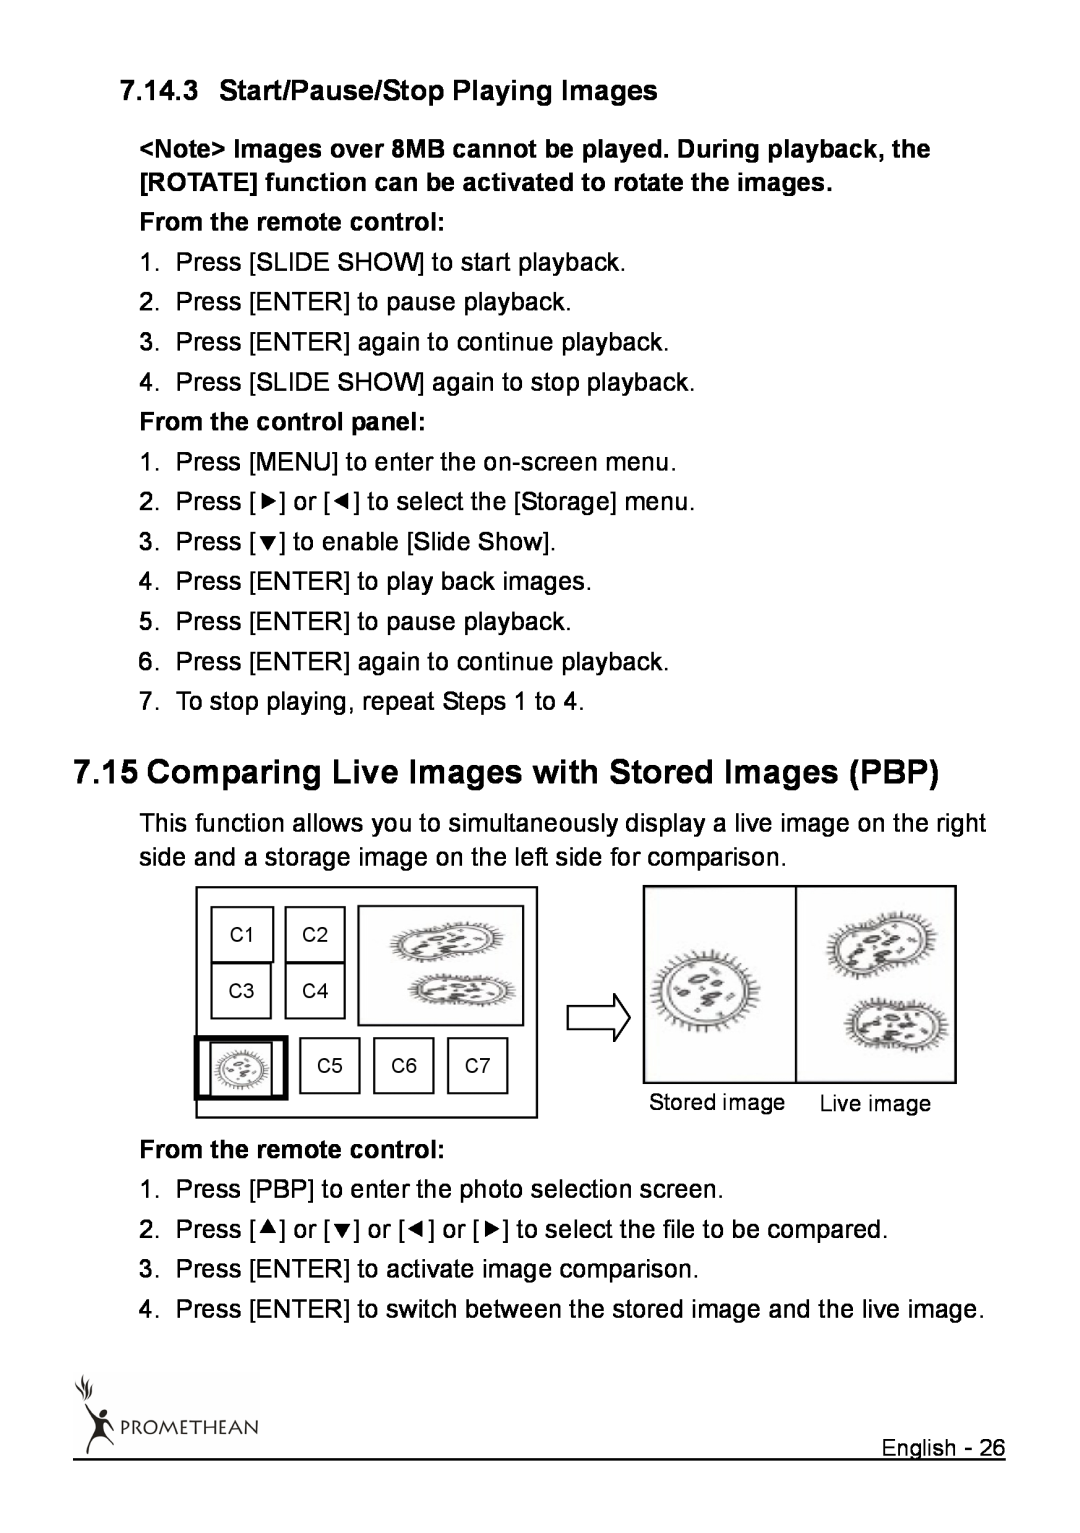 Promethean 322 7.15Comparing Live Images with Stored Images PBP, Start/Pause/Stop Playing Images, From the remote control 